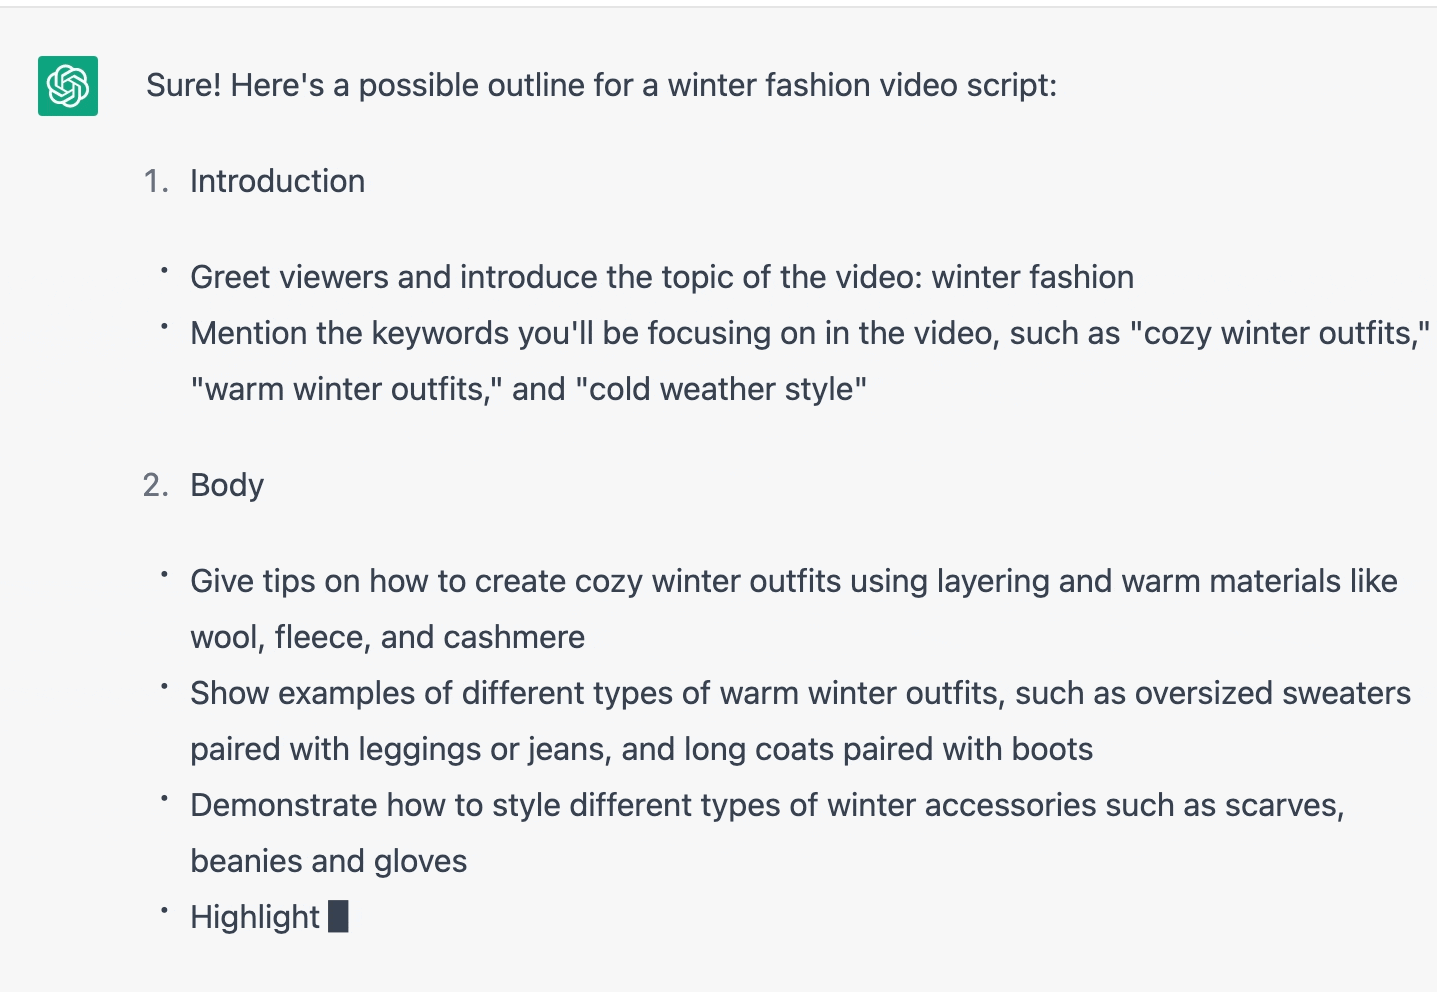 ChatGPT prompt about possible outline for a winter fashion video script